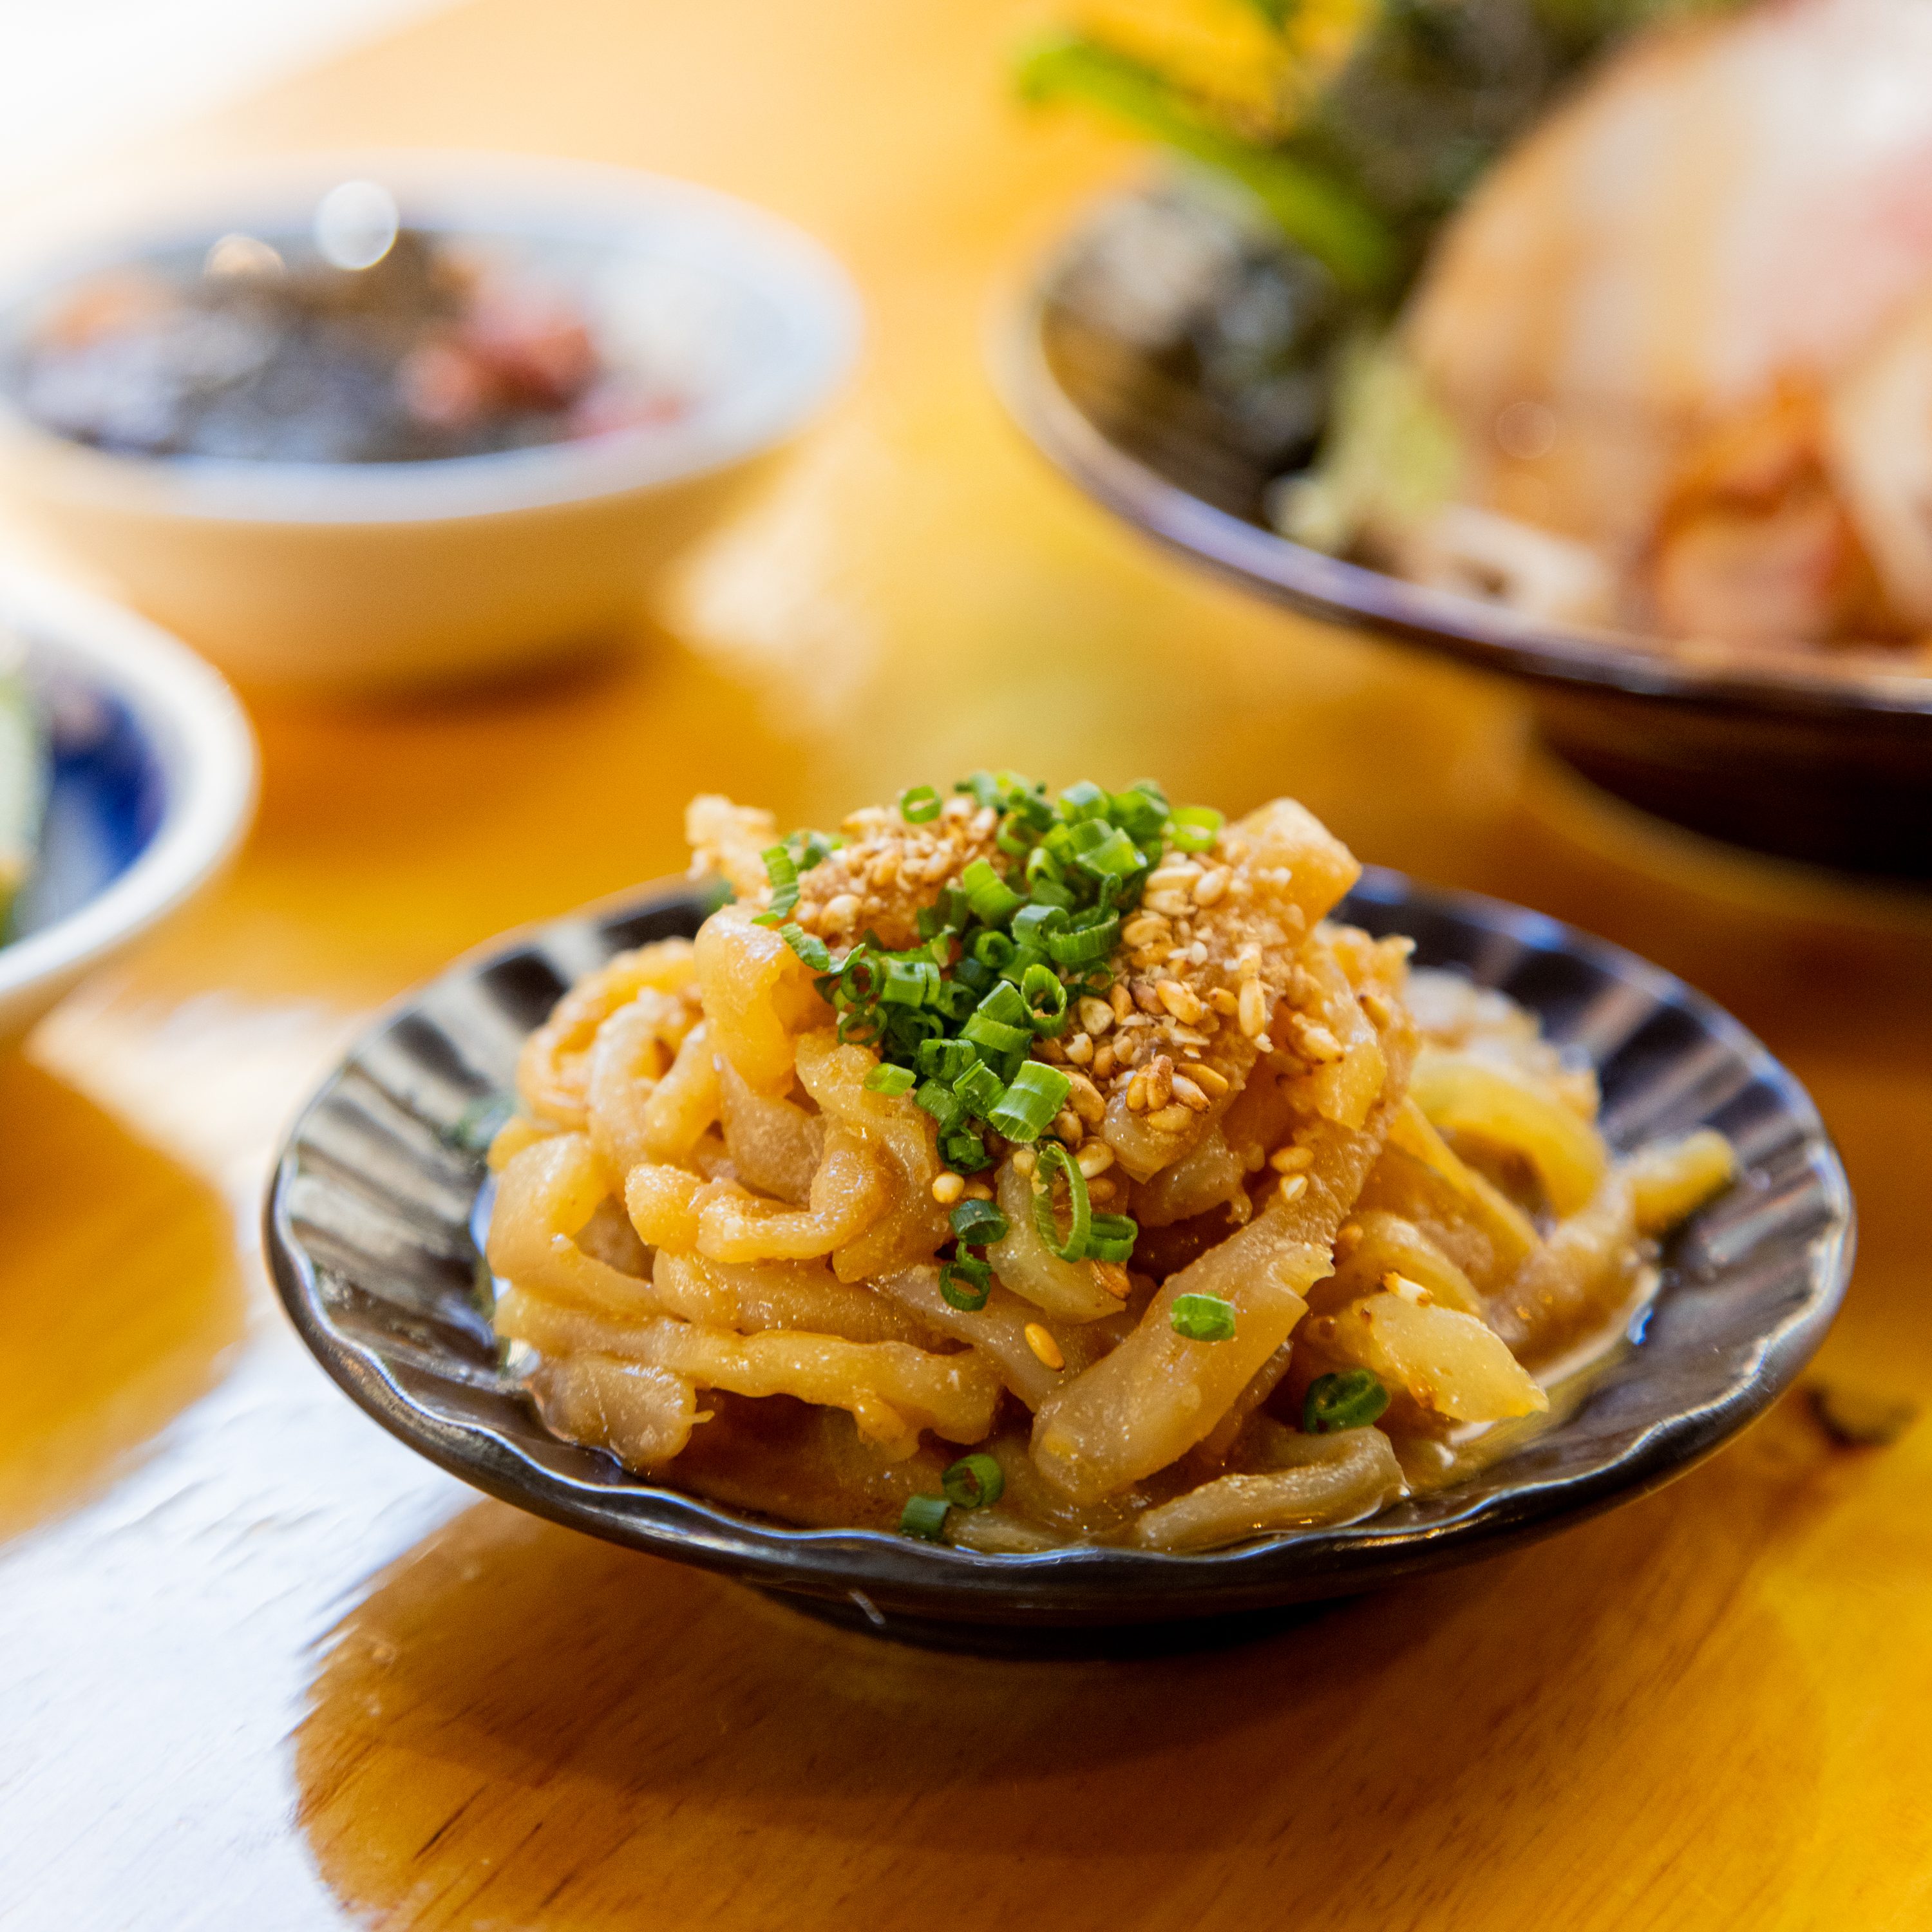 A plate of udon noodles topped with green onions and sesame seeds, with blurry bowls in the background.